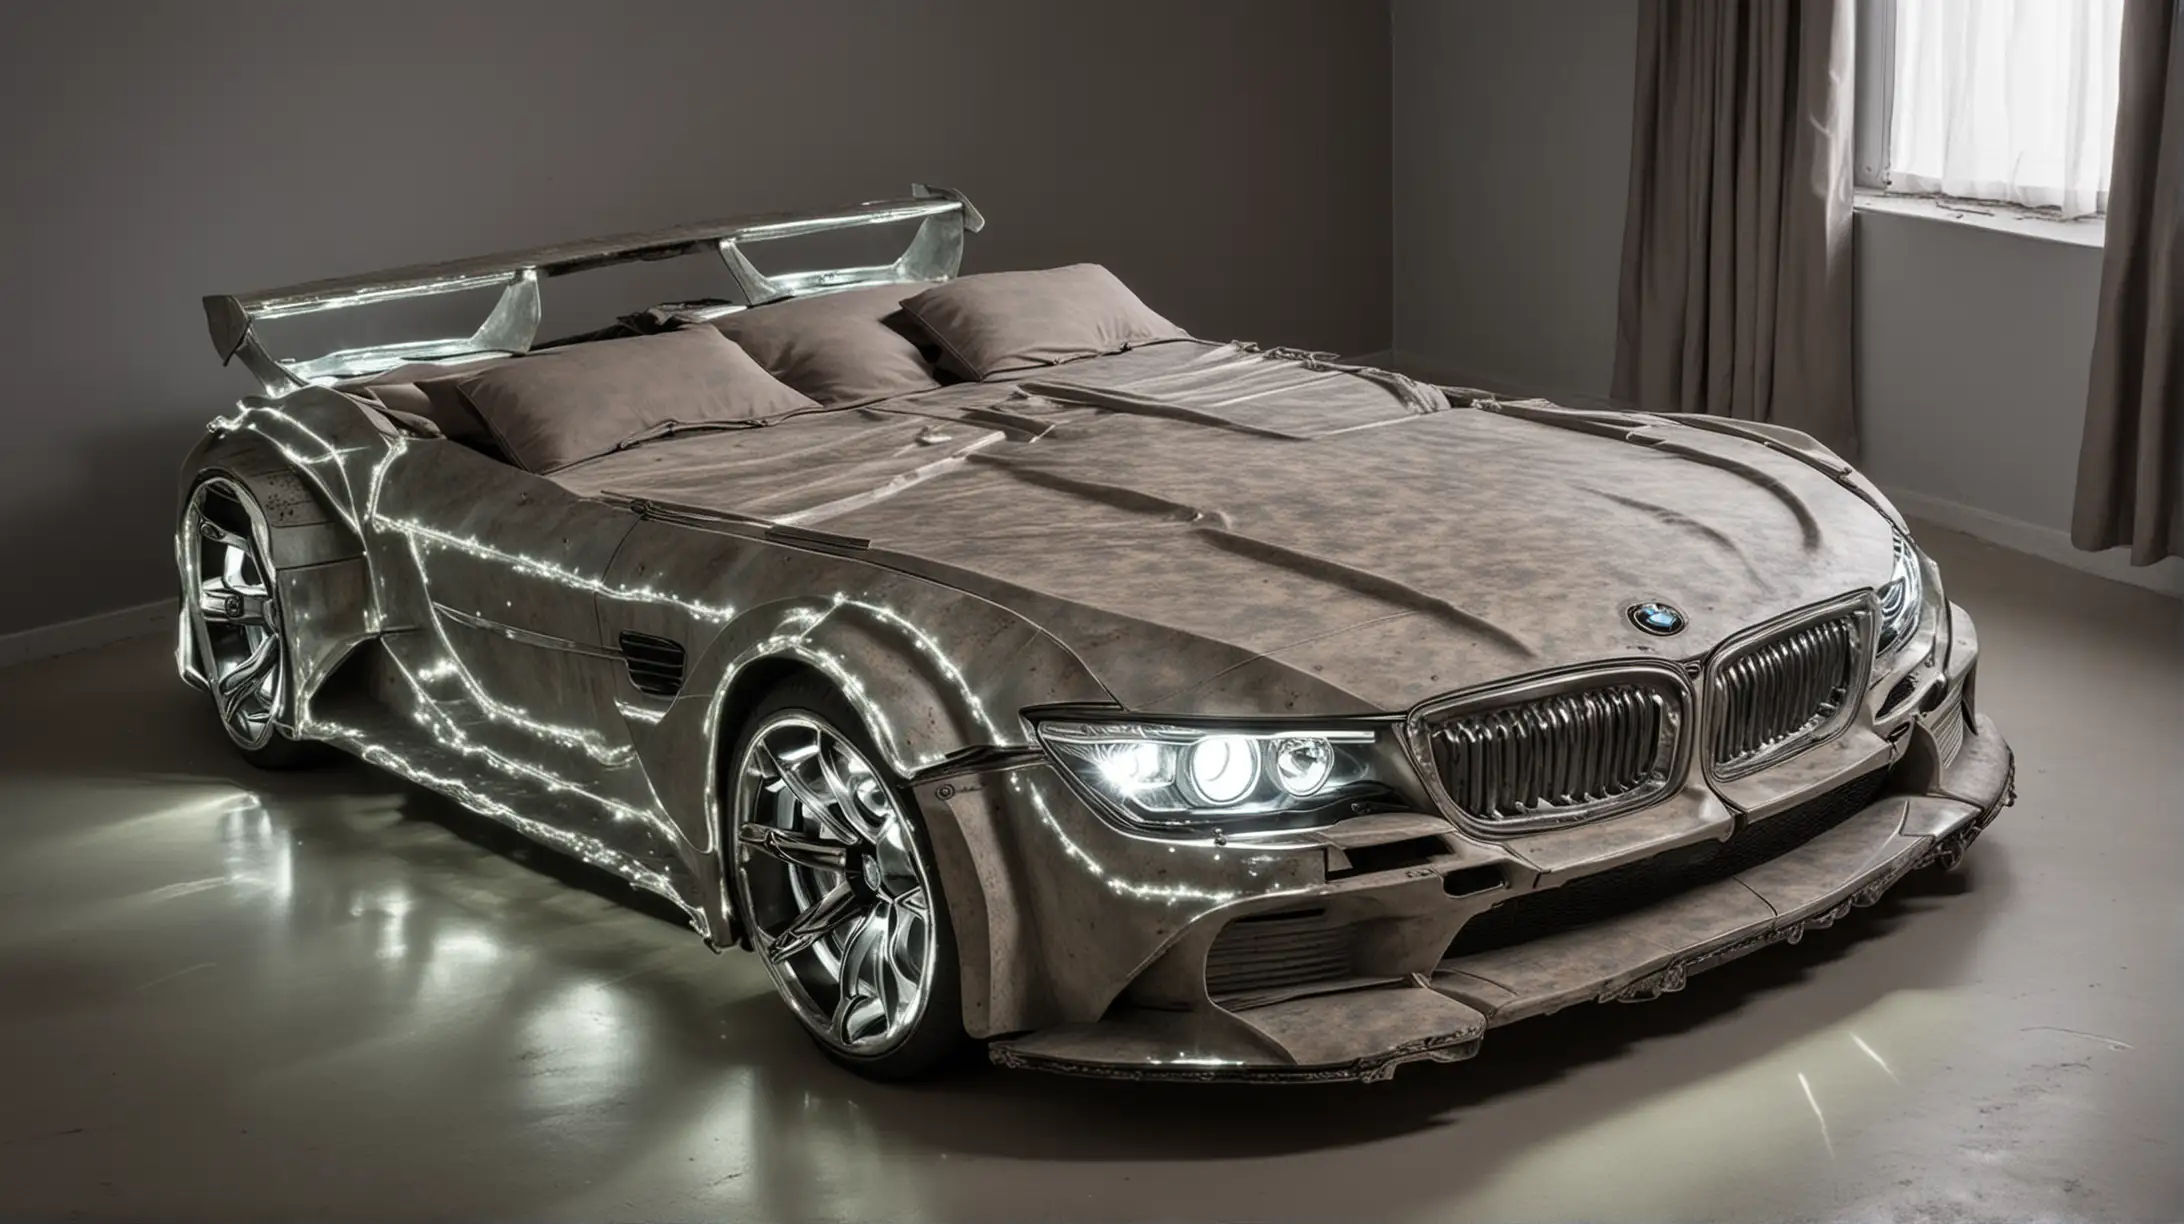 Double bed in the shape of a BMW car with headlights on and unusual coloring